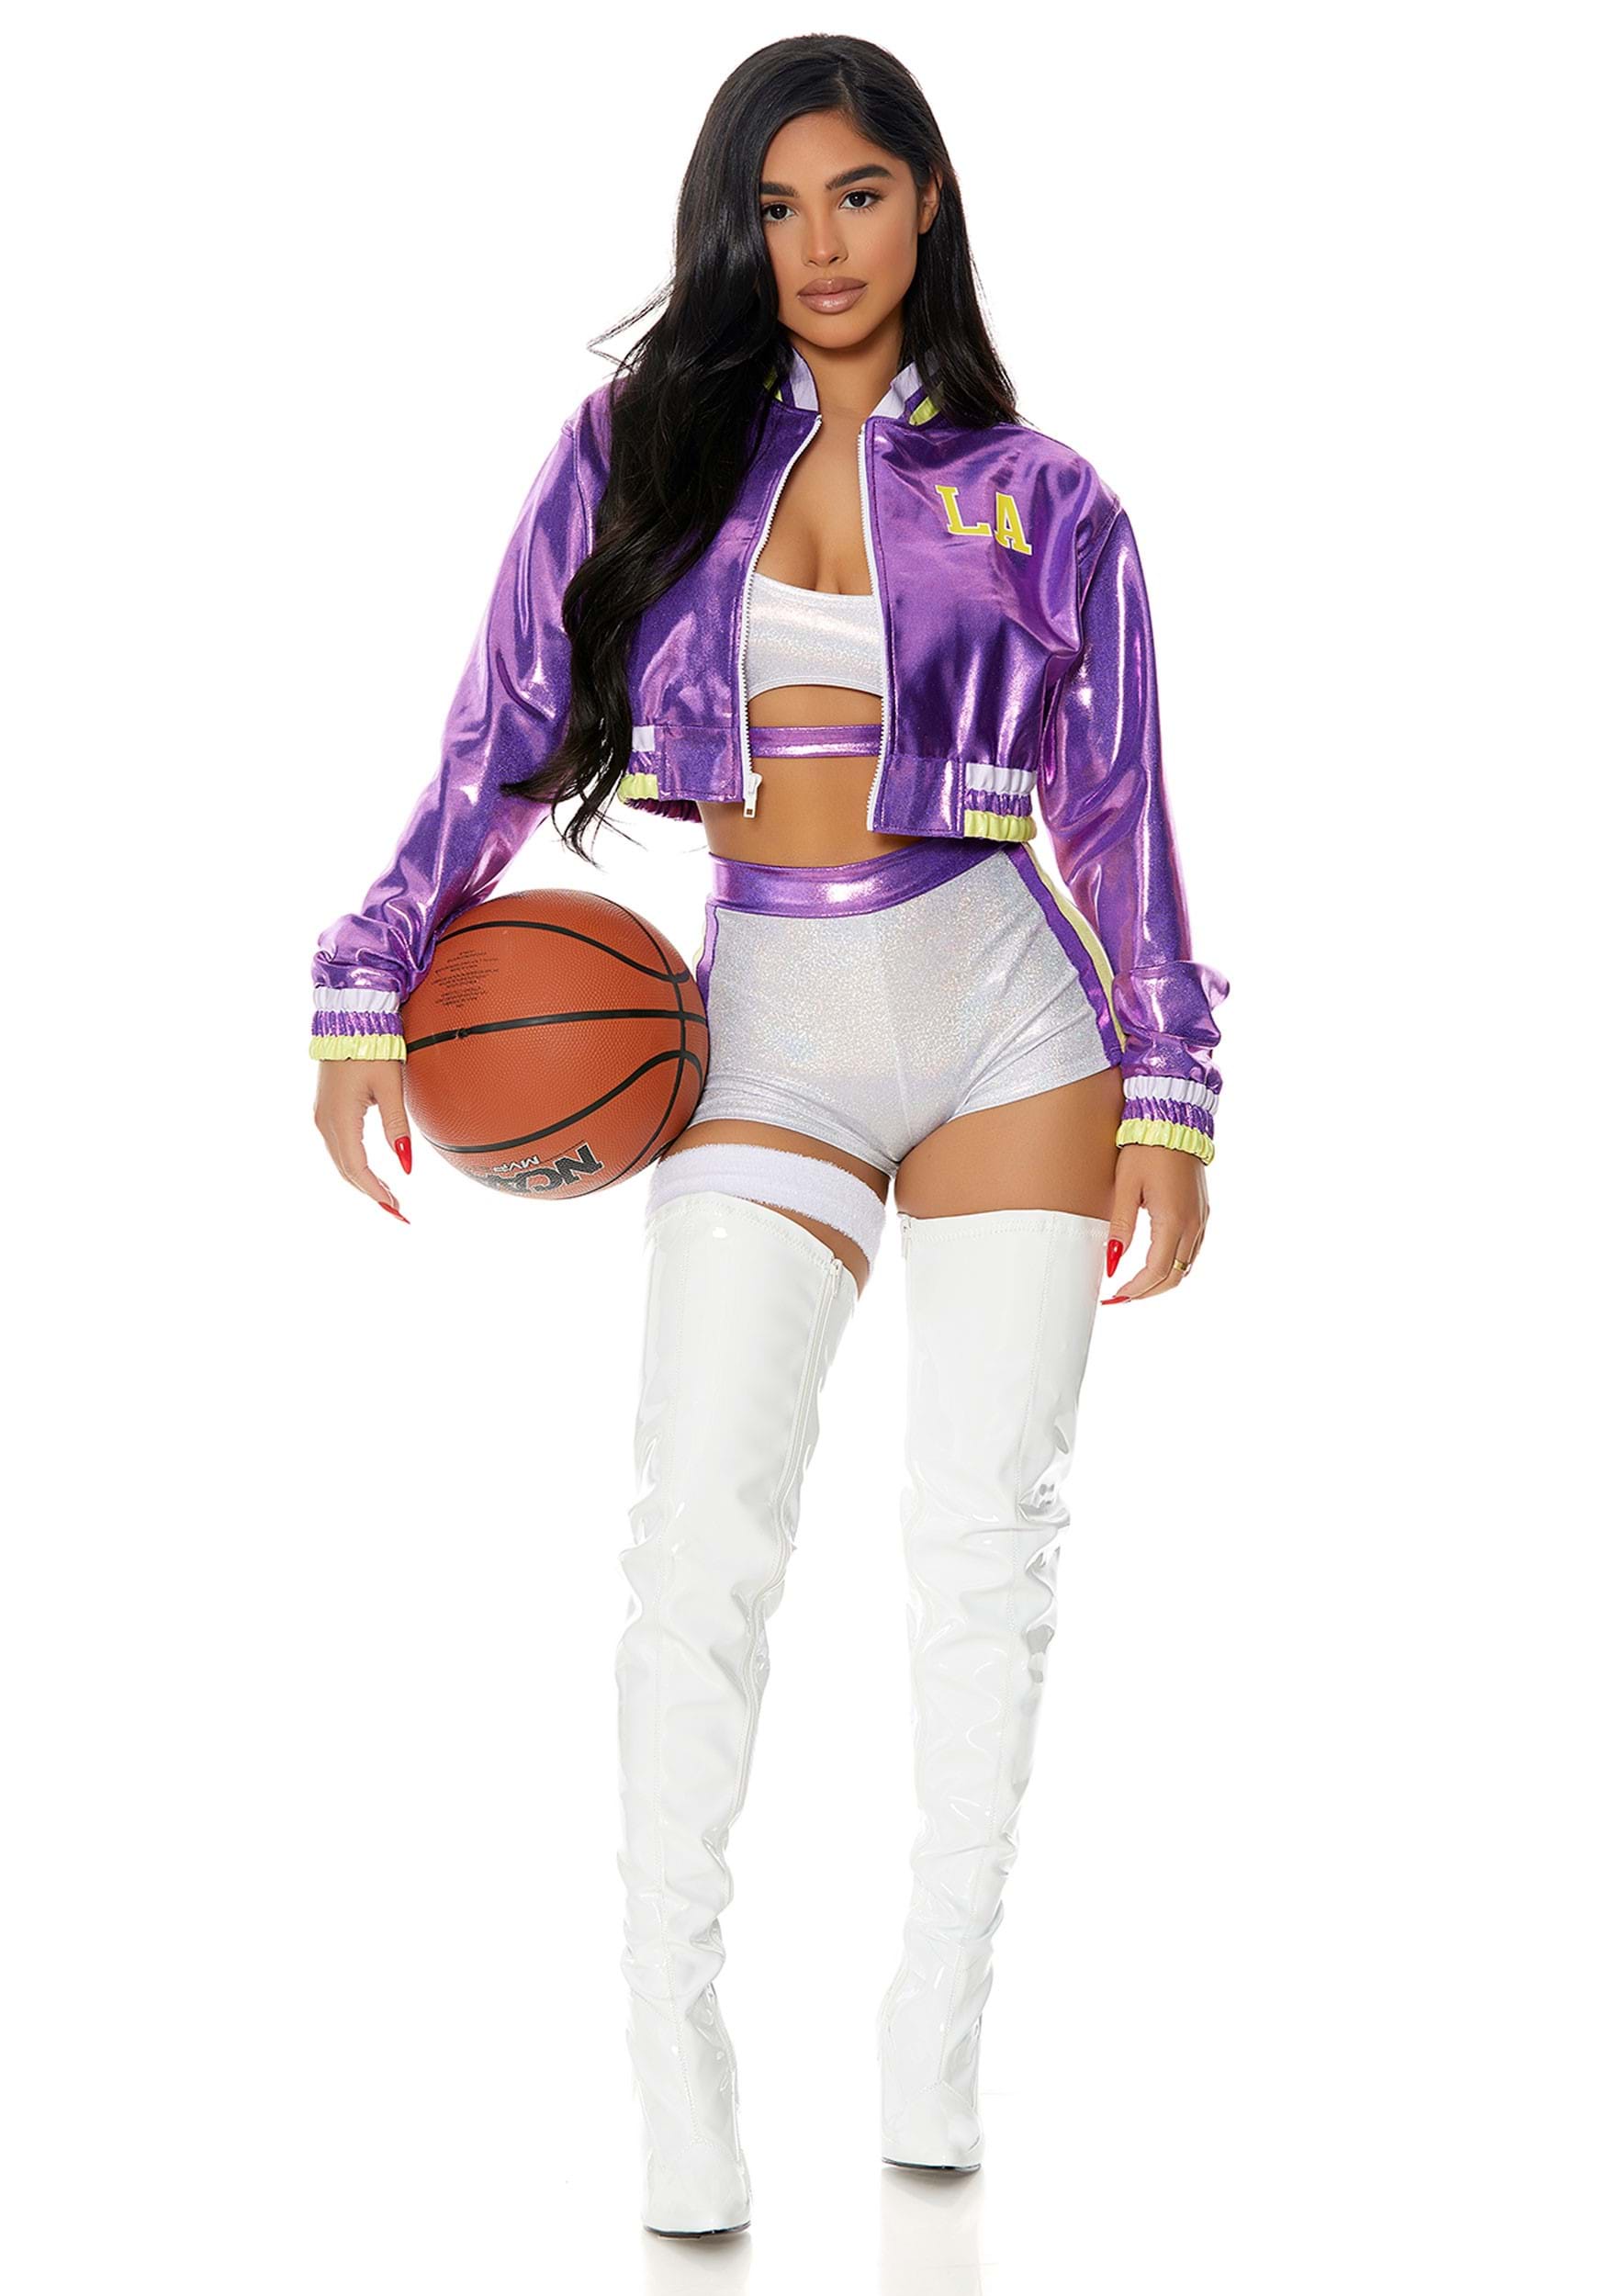 Image of Enjoy the Show Sexy Women's Basketball Player Costume ID FP551530-L/XL